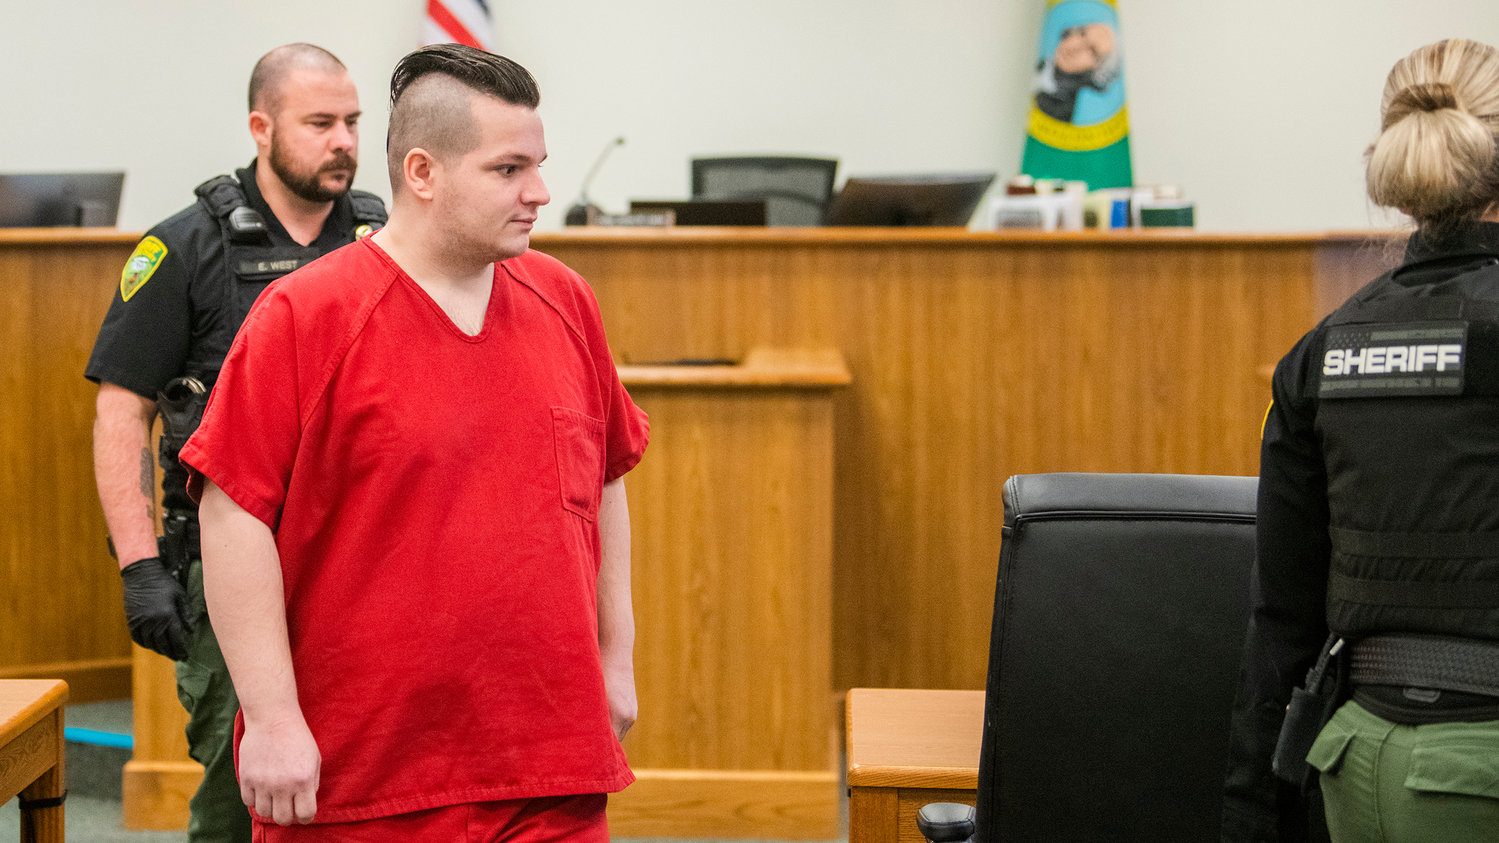 Cristopher Allen Gaudreau appears in Lewis County Superior Court for sentencing Wednesday morning in Chehalis.